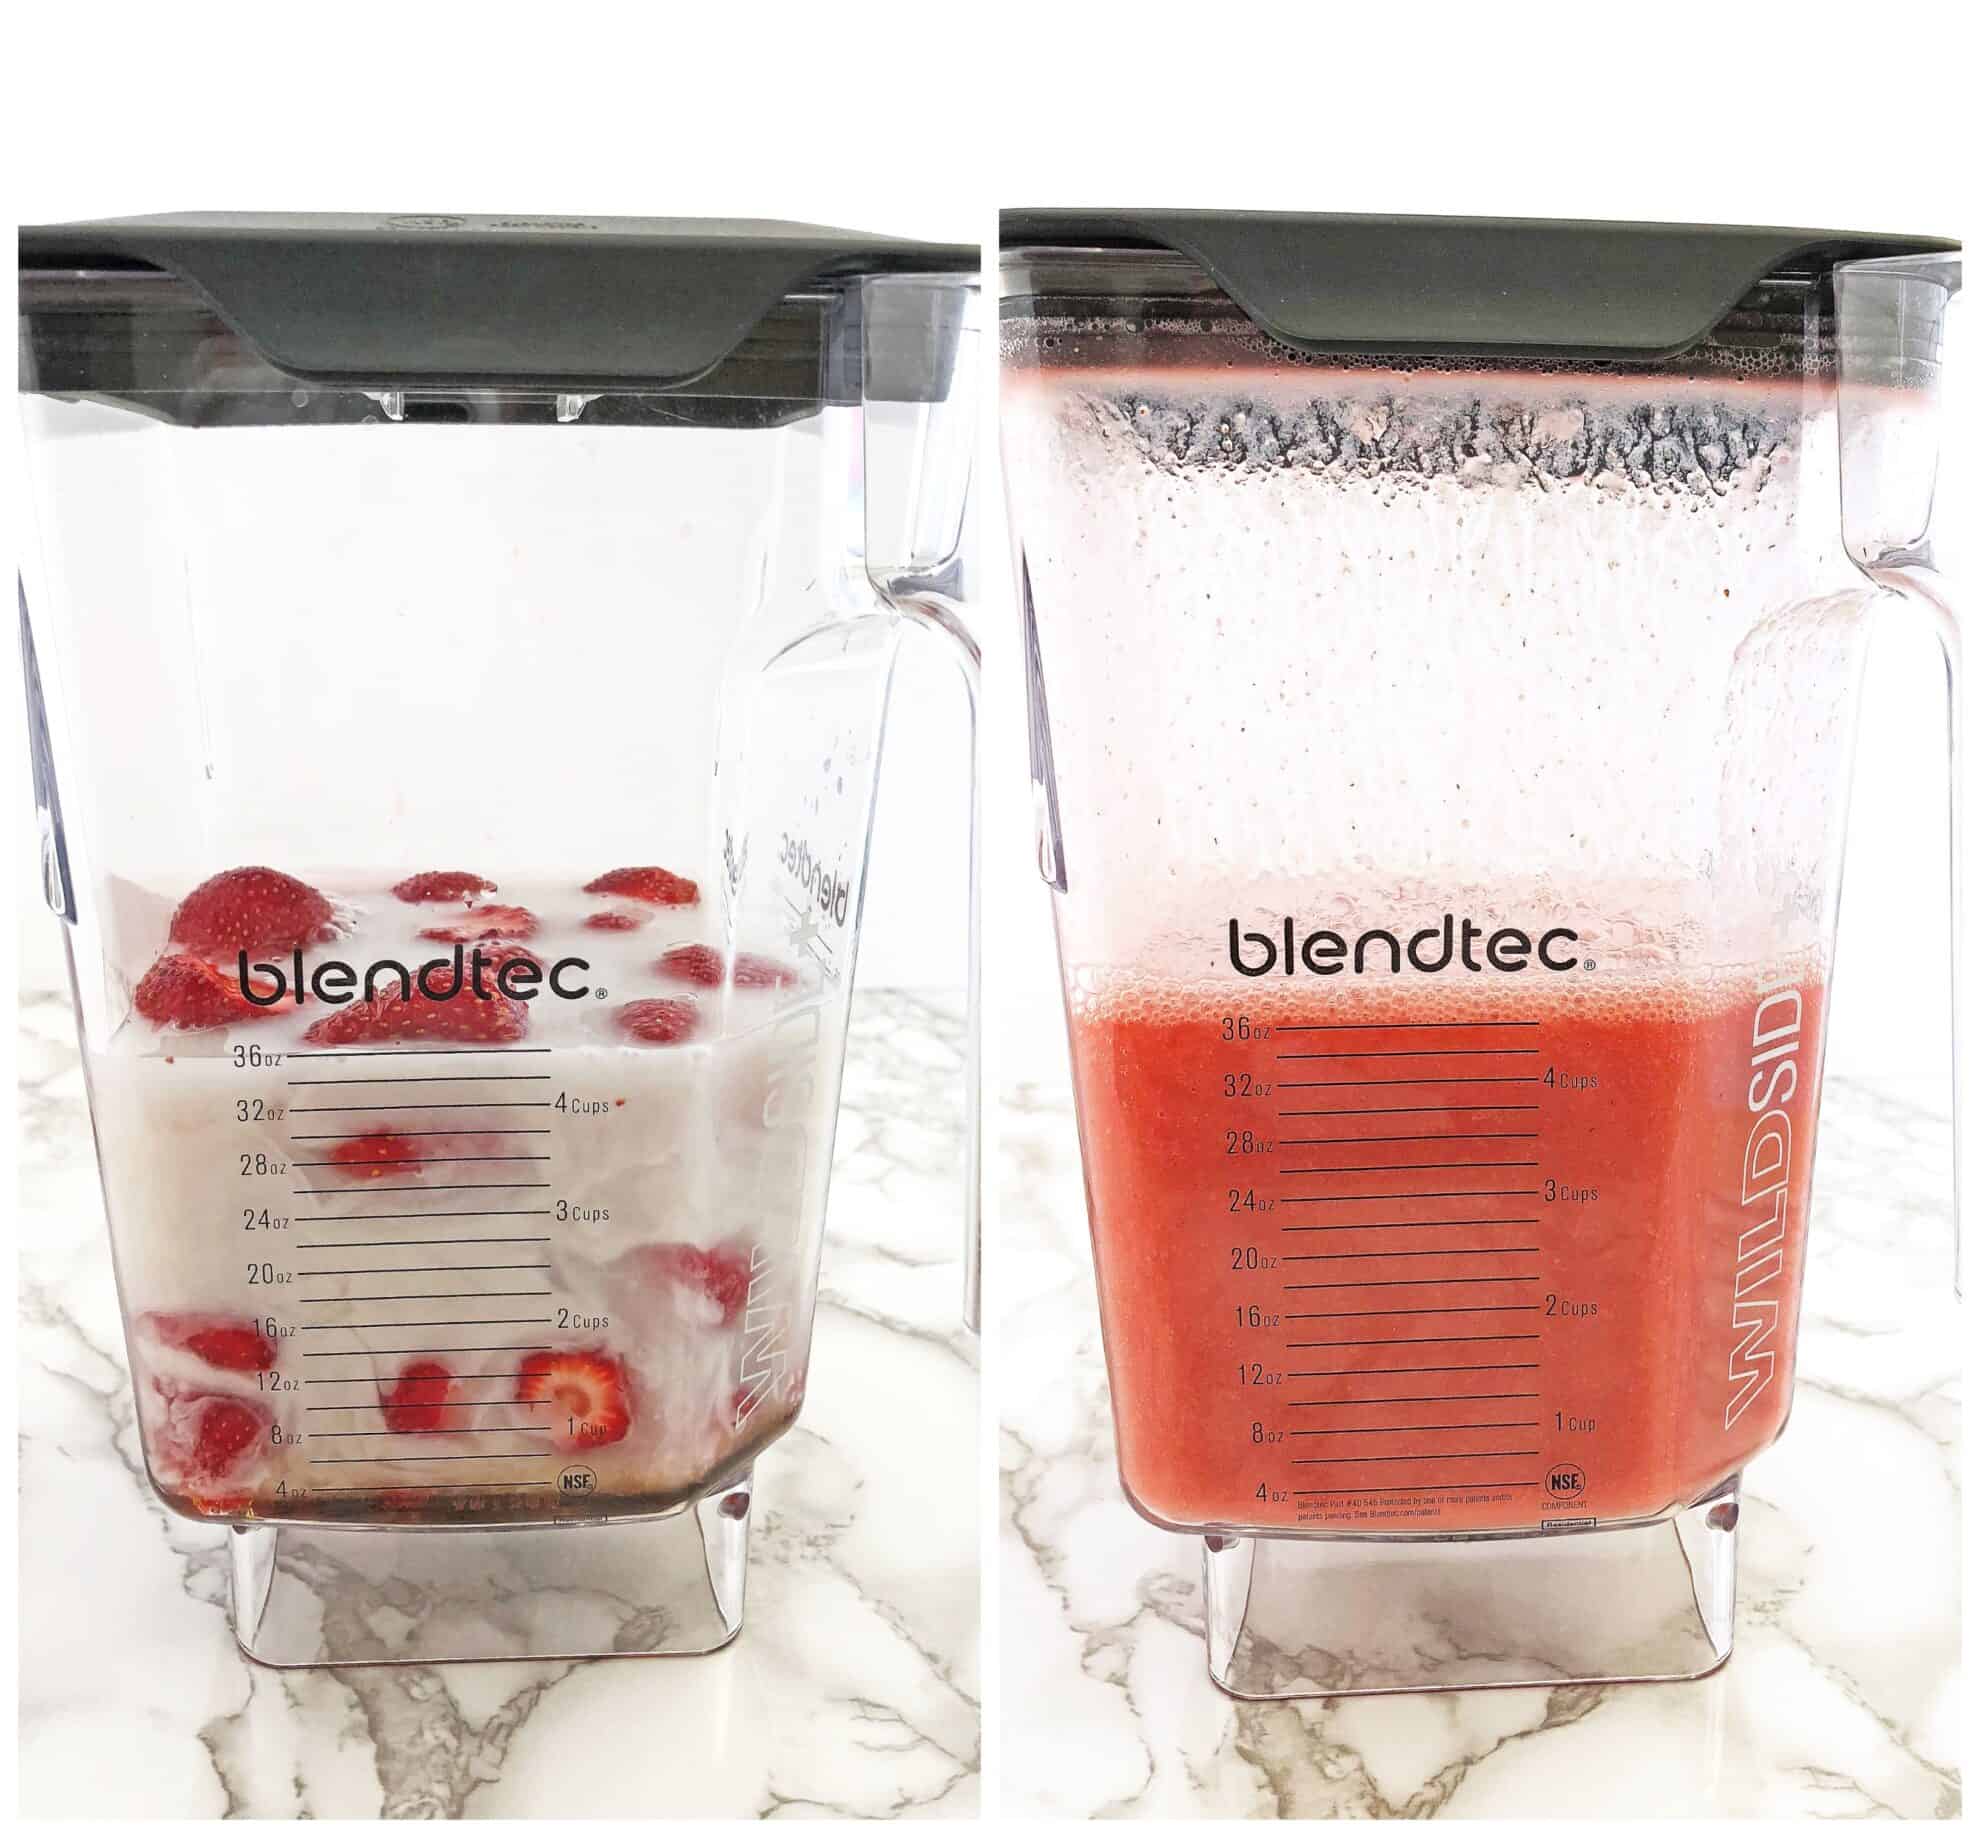 Now blend everything together for 2 minutes (or press the smoothie cycle twice on Blendtec blender).